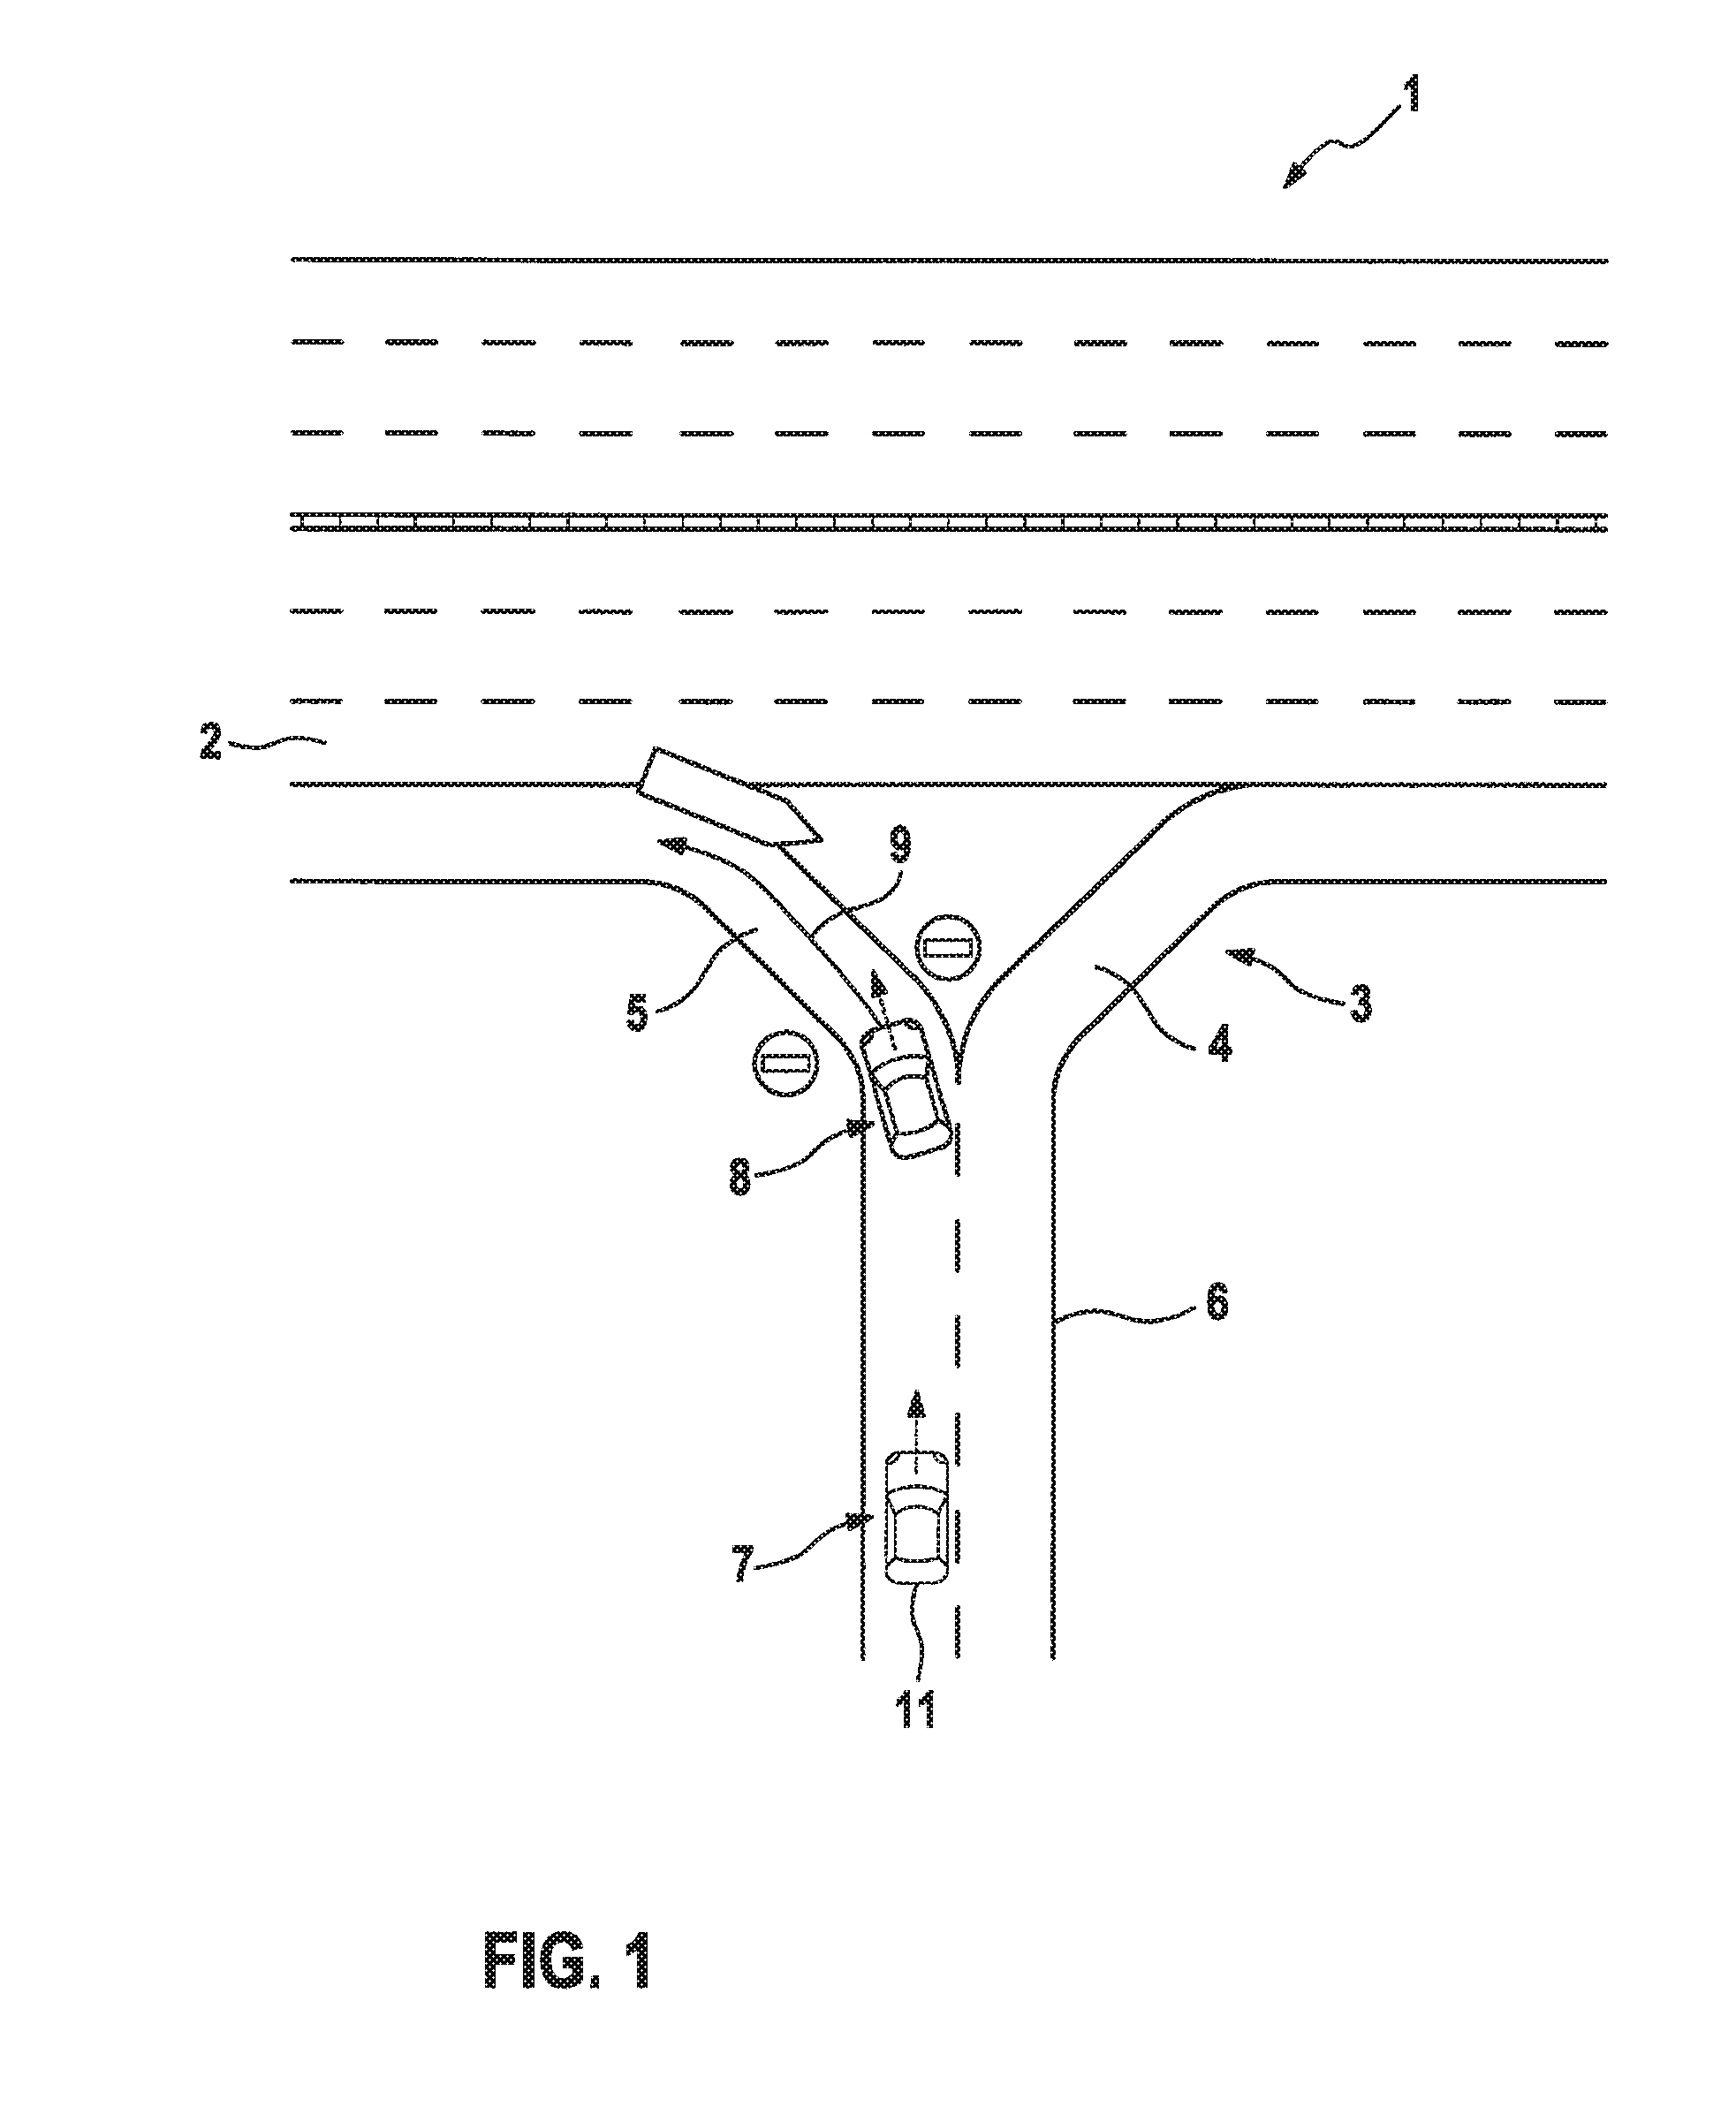 Method and control and detection device for determining the plausibility of a wrong-way travel of a motor vehicle